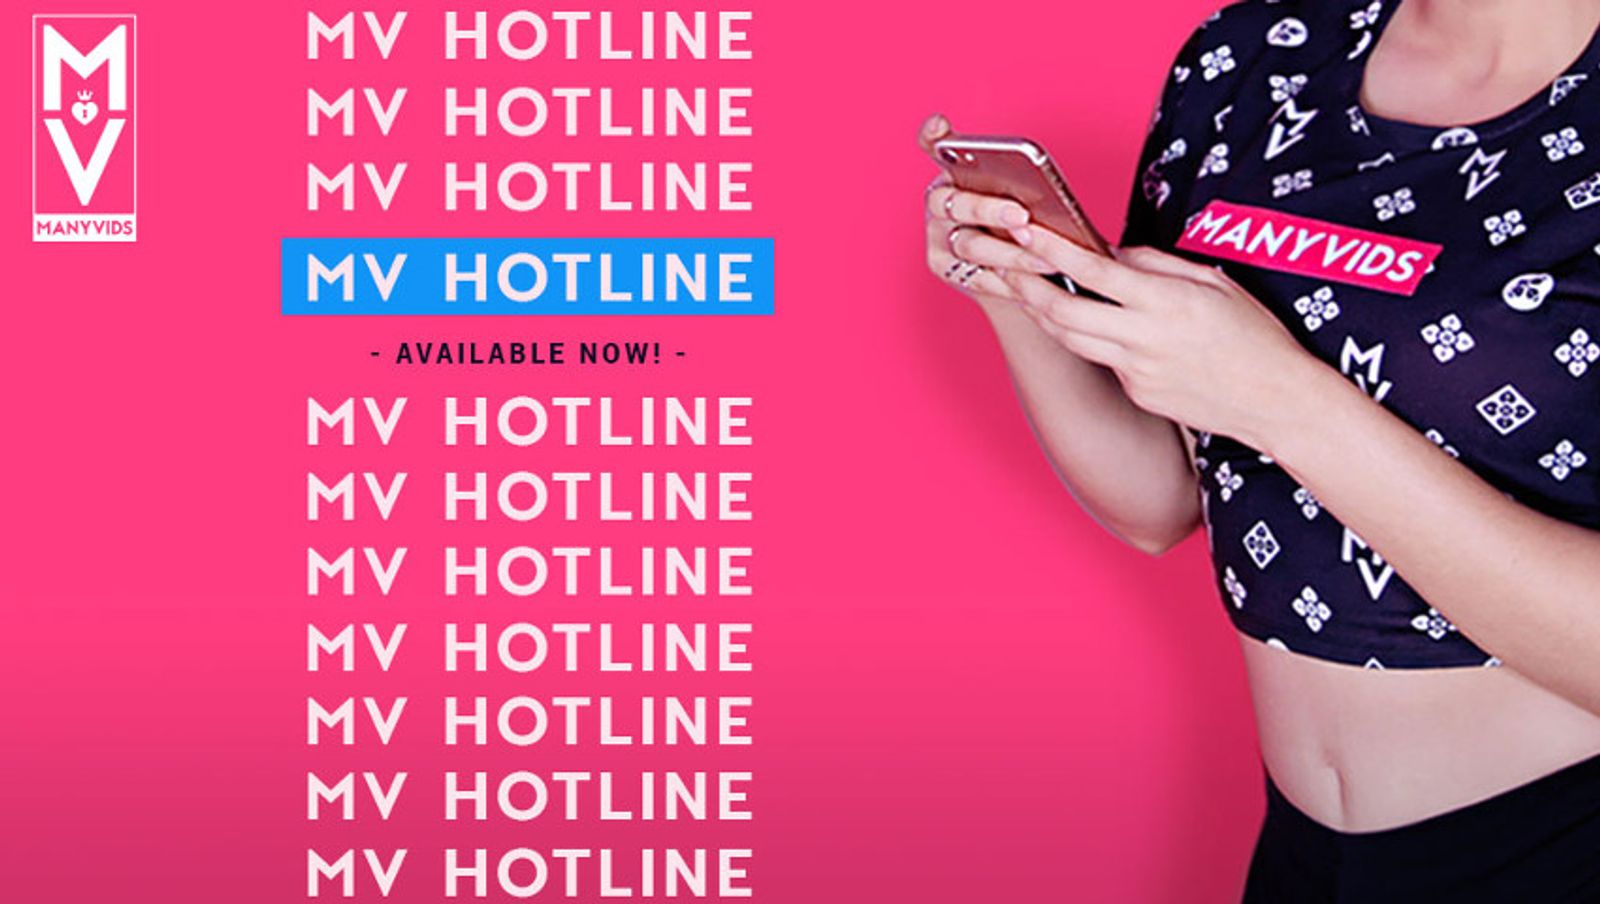 ManyVids Launches Crisis Hotline